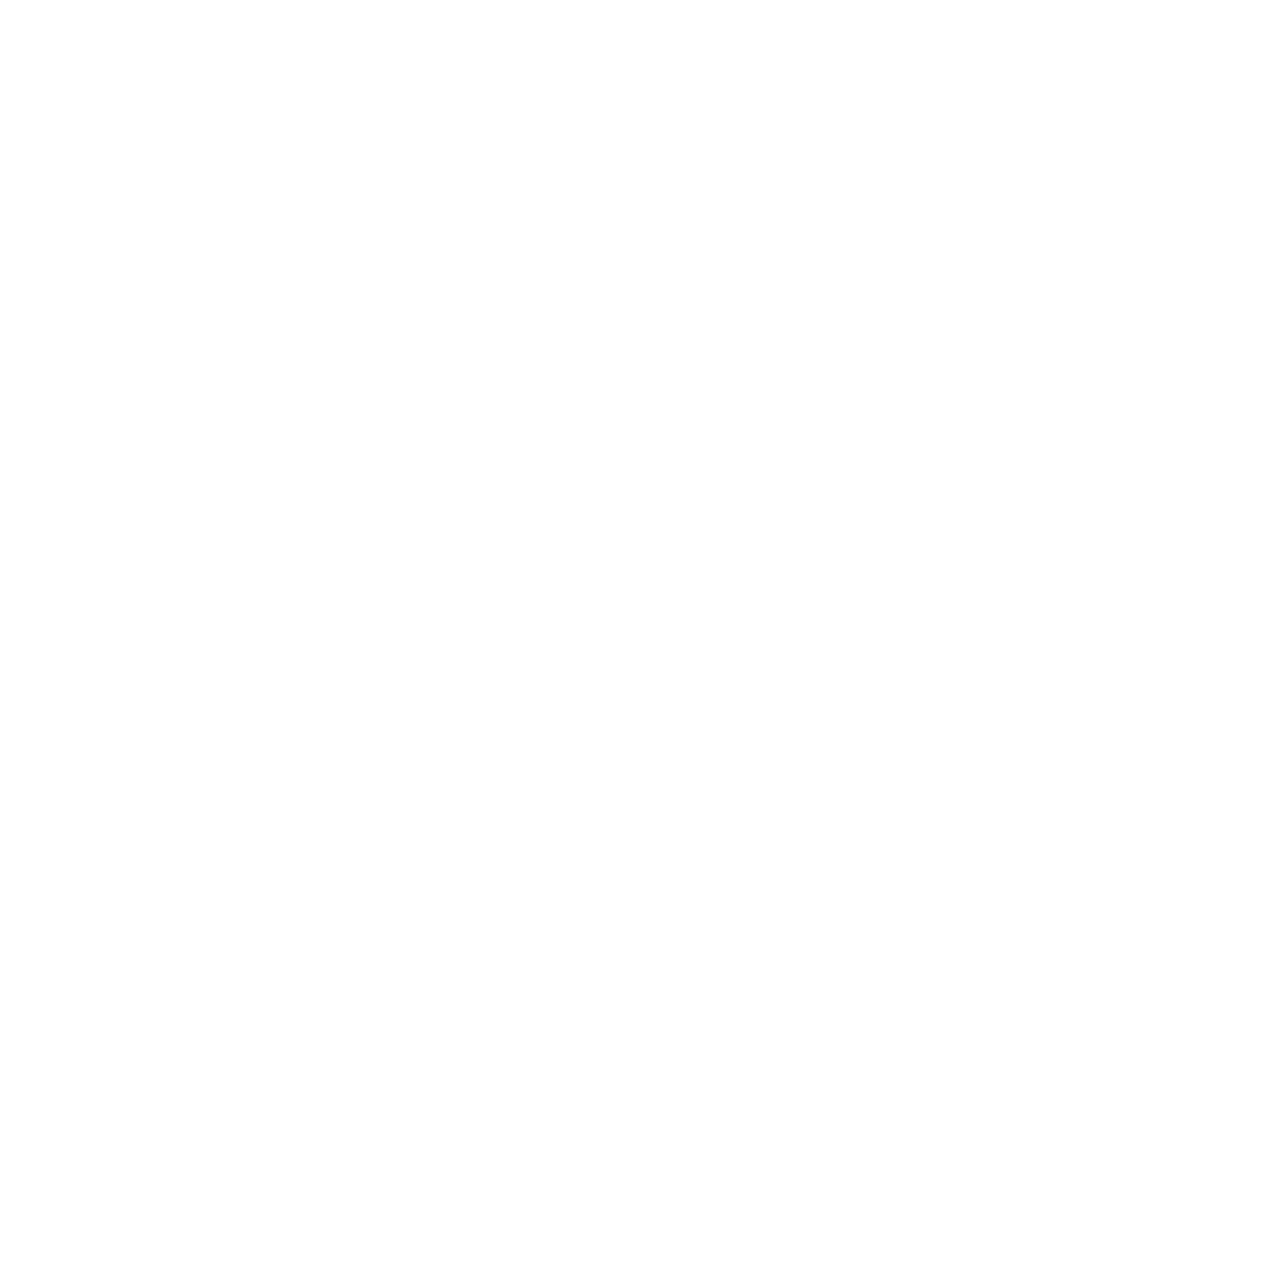 Oceania Volleyball